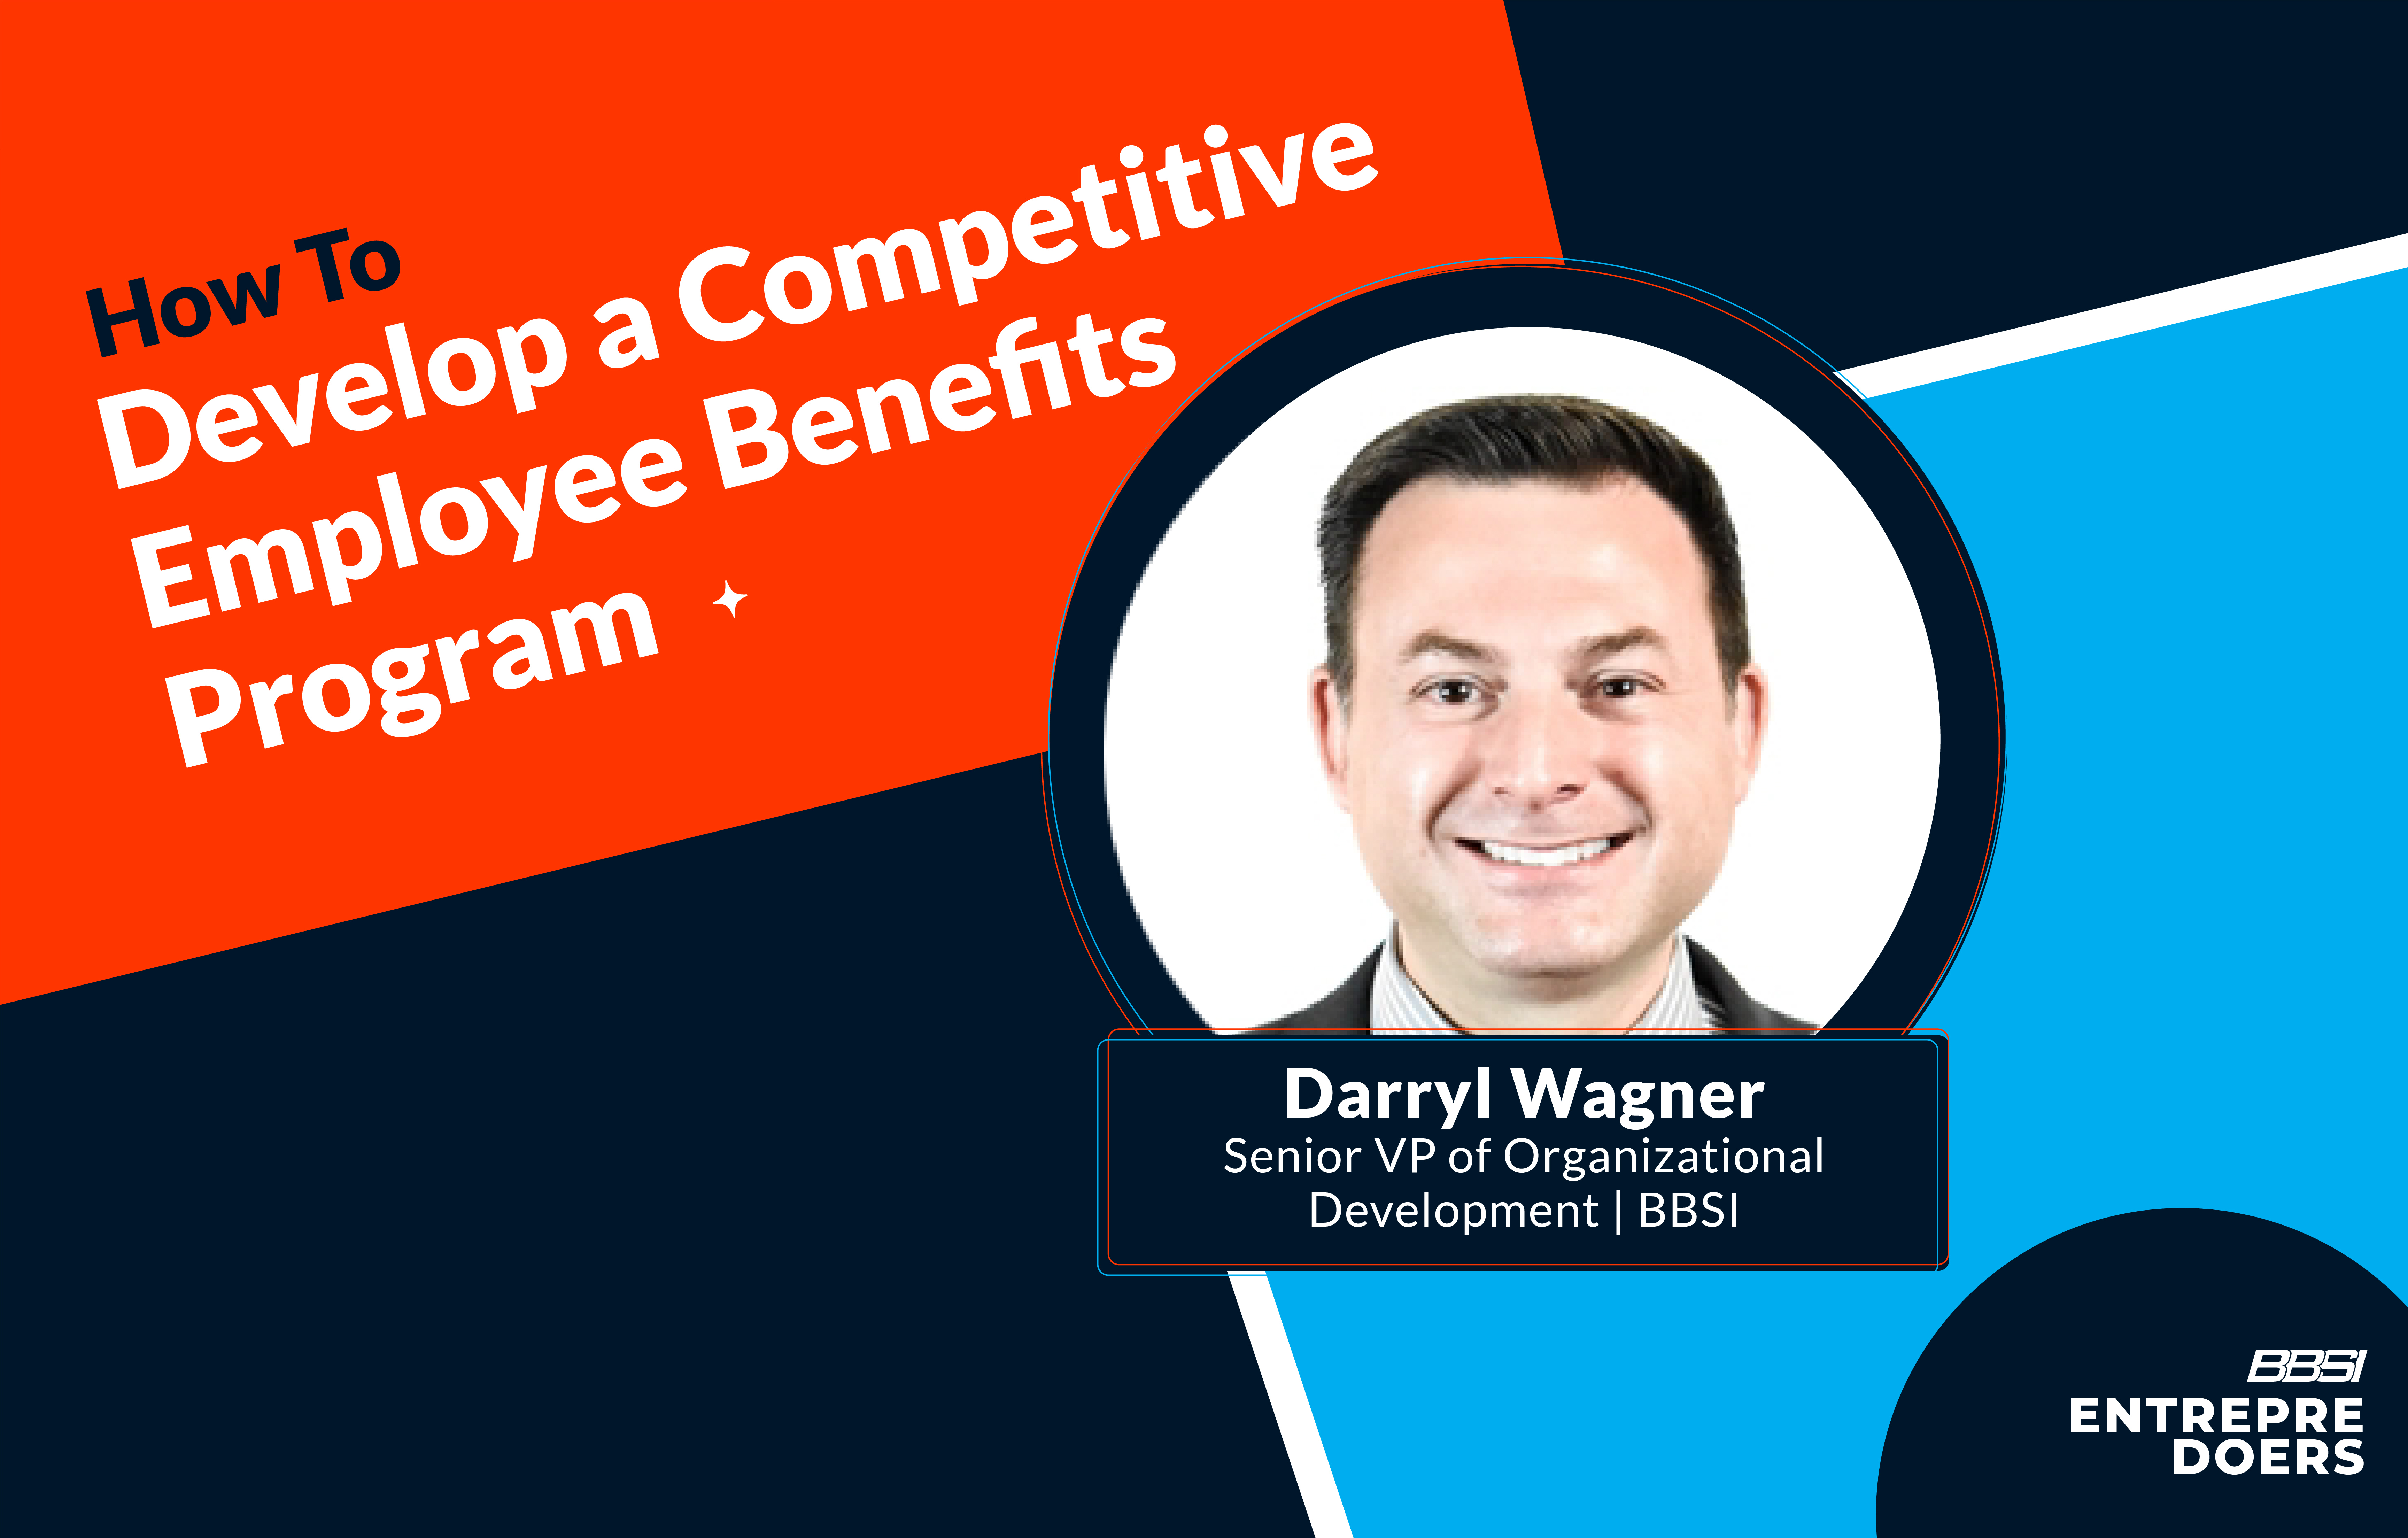 How to Develop a Competitive Employee Benefits Program